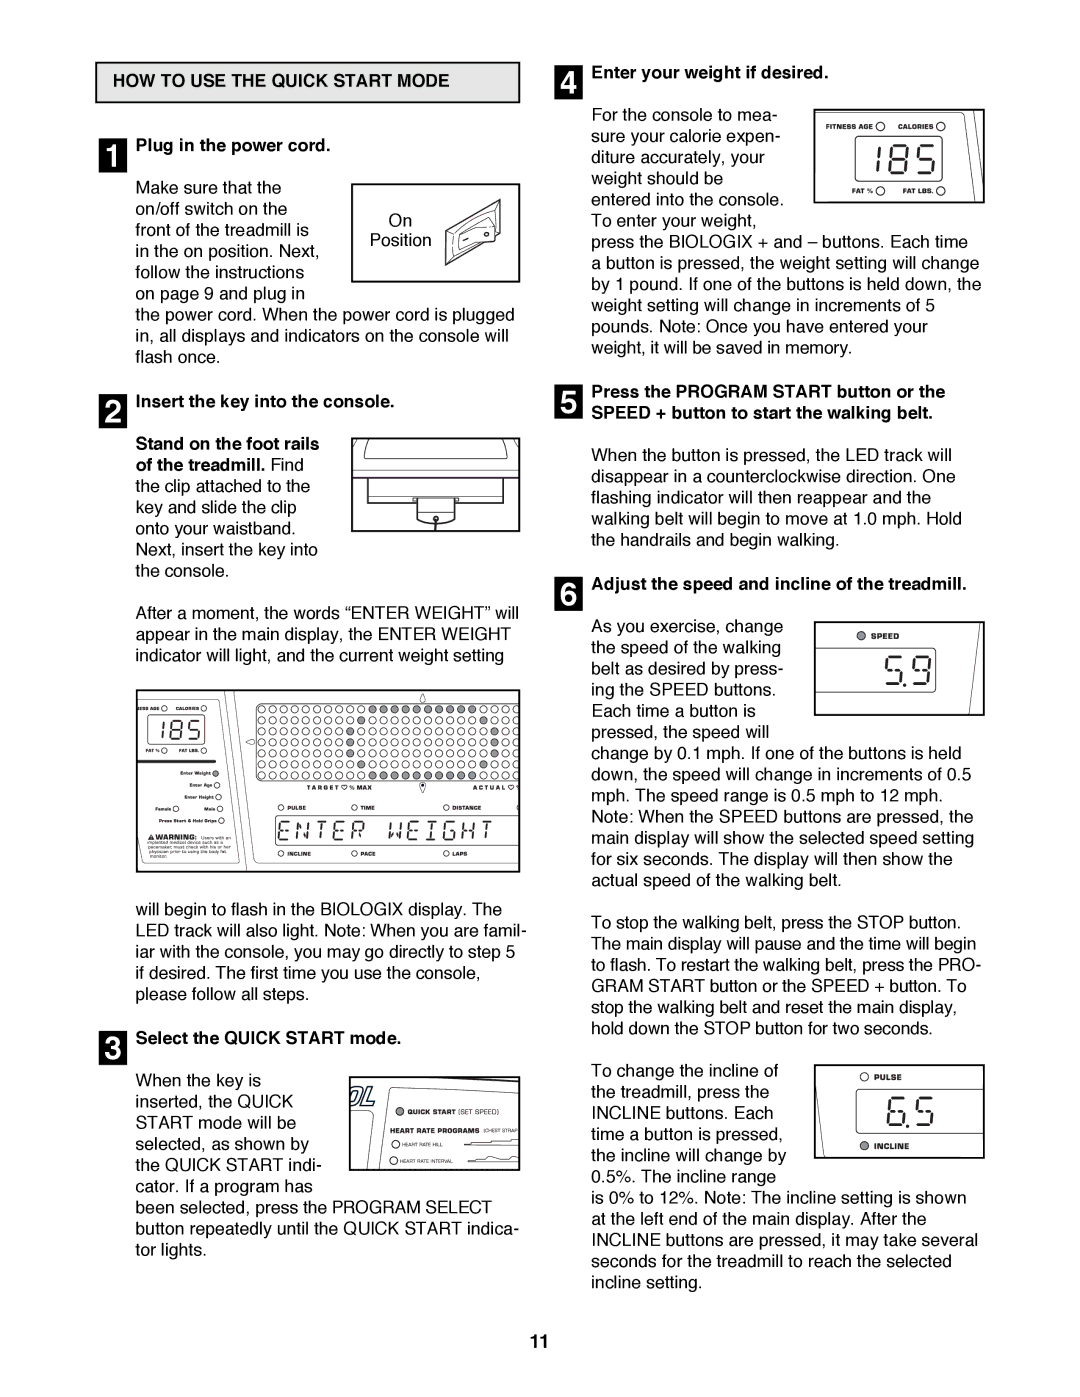 NordicTrack NTTL24080 manual HOW to USE the Quick Start Mode 